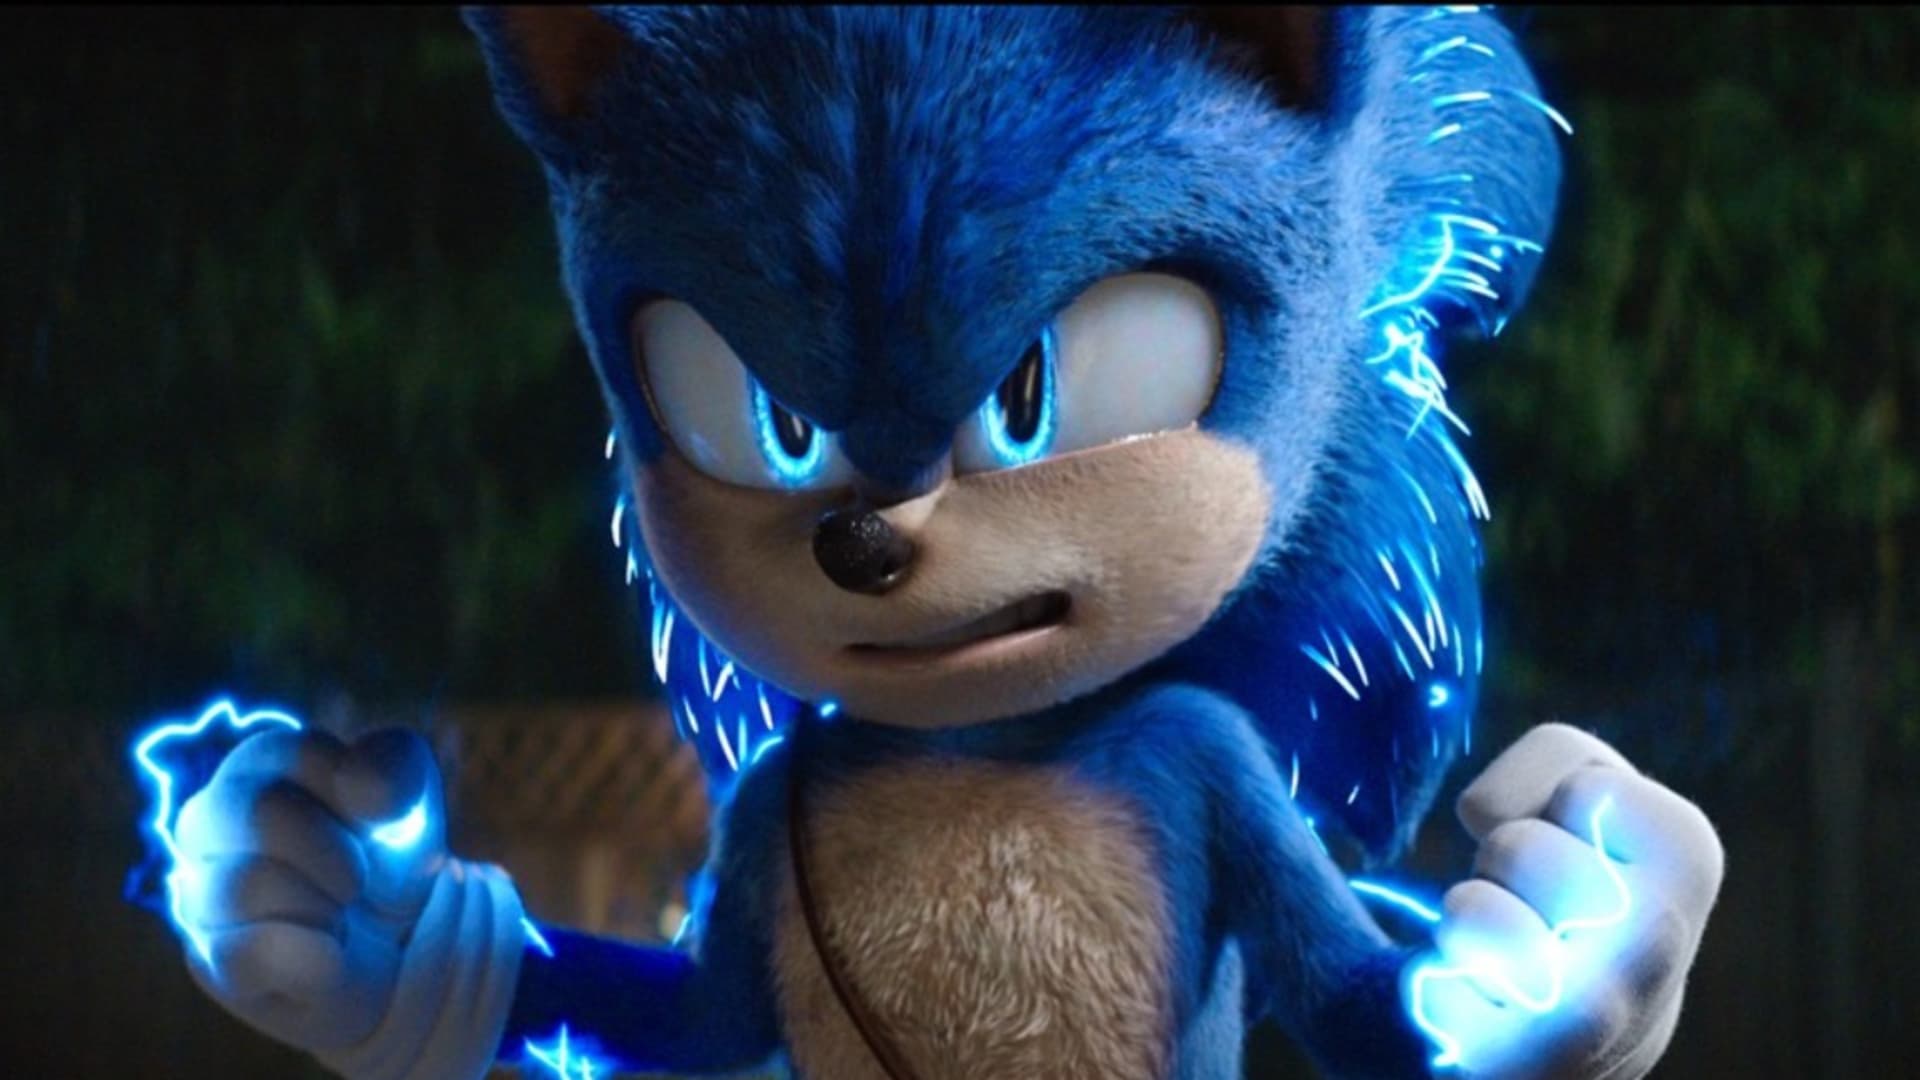 ‘Sonic 2’ opening weekend could signal return of families to cinemas